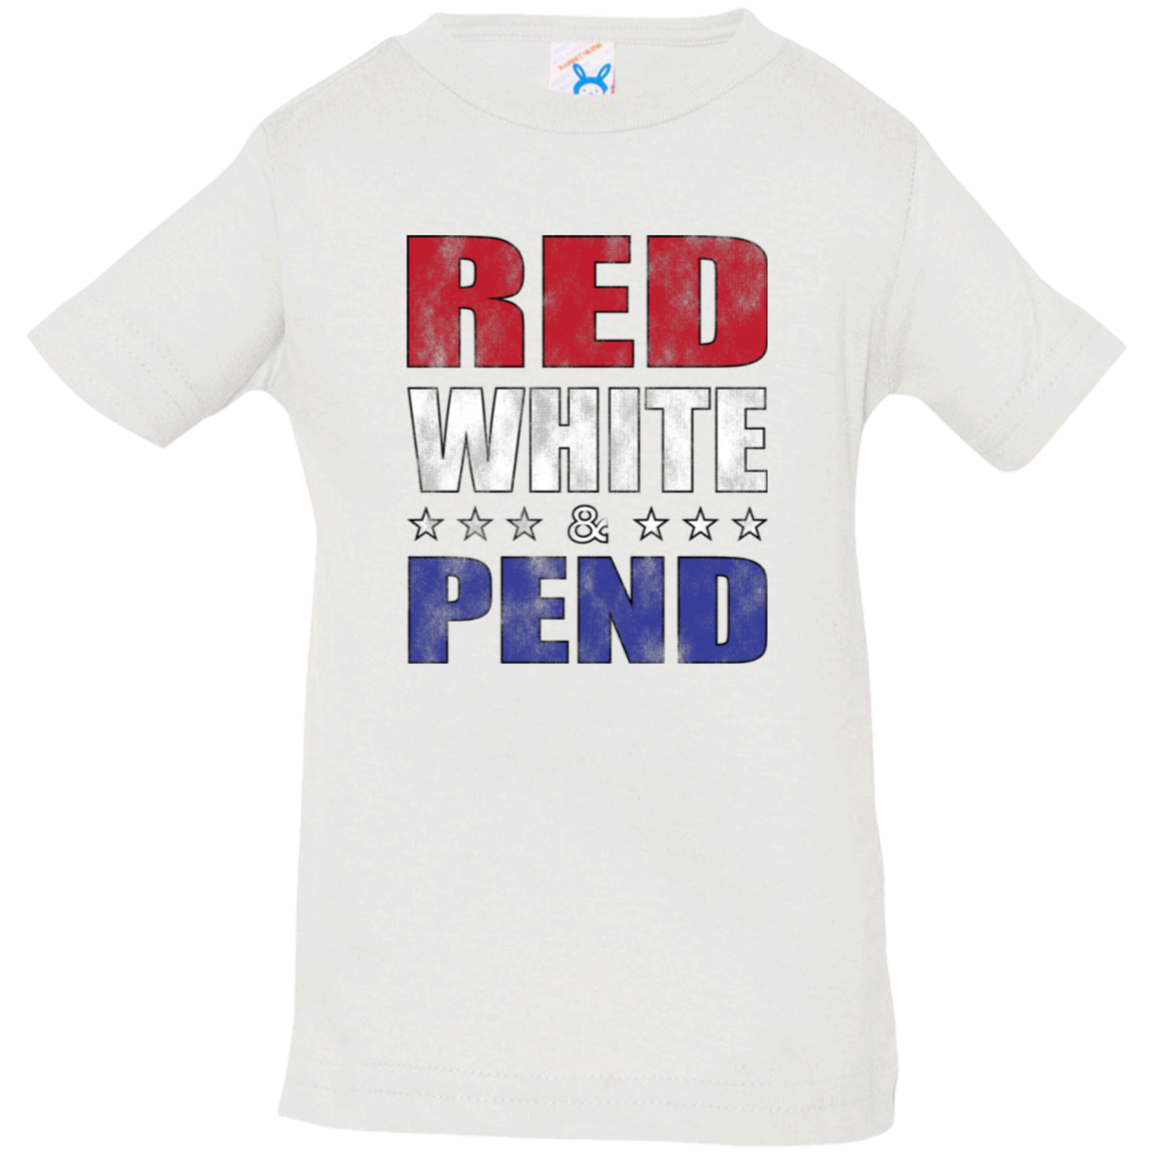 Red White & Pend Infant Shirt